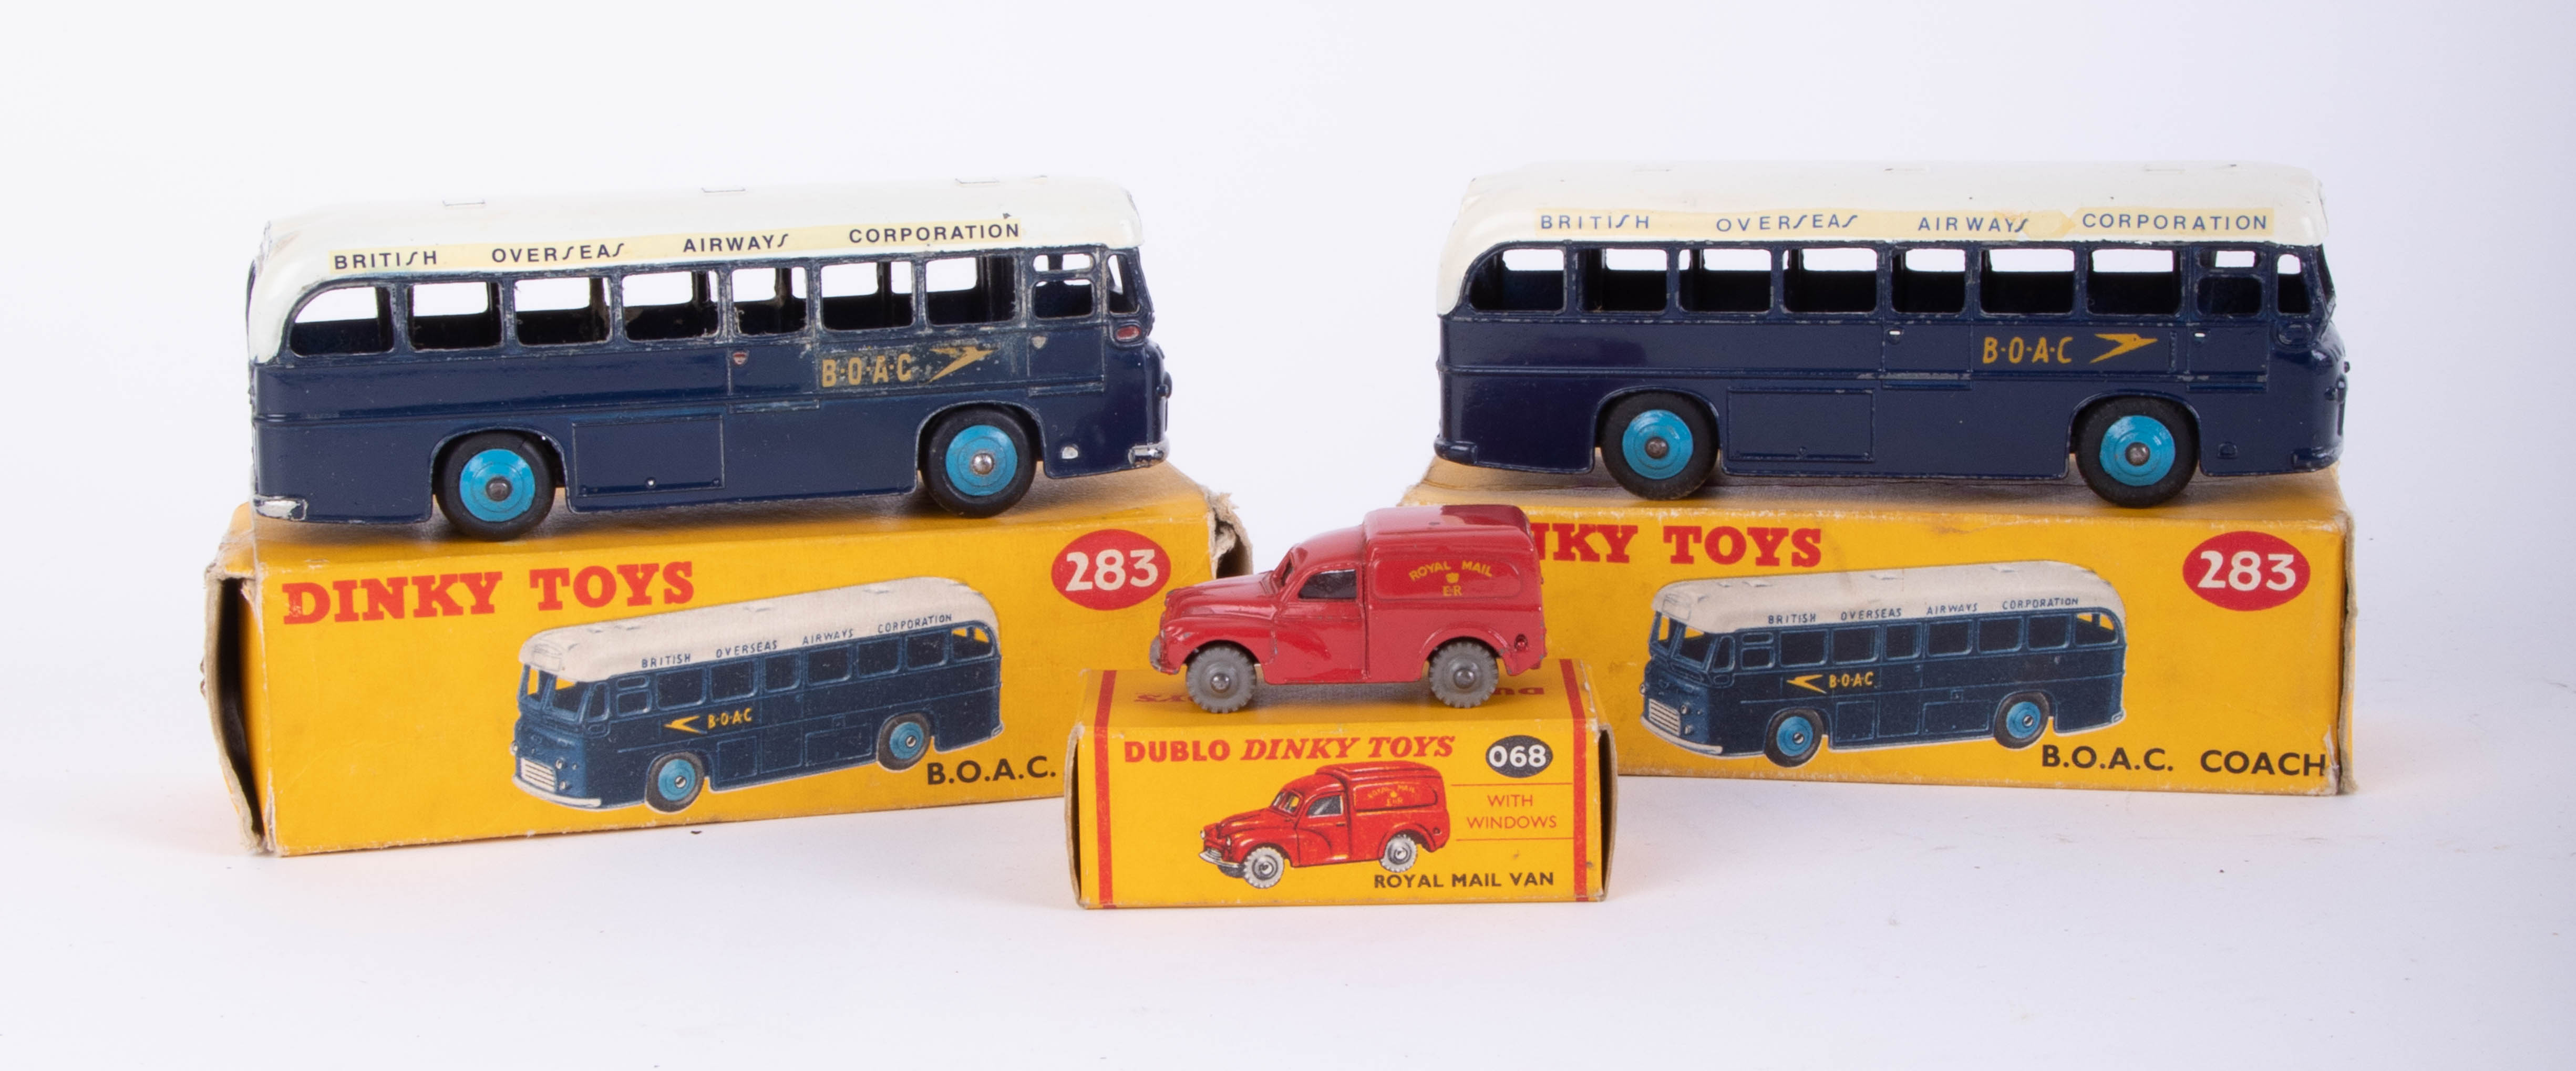 Dinky Toys, Two BOAC Coaches 283, Dublo Dinky Royal Mail Van 068, boxed (3).